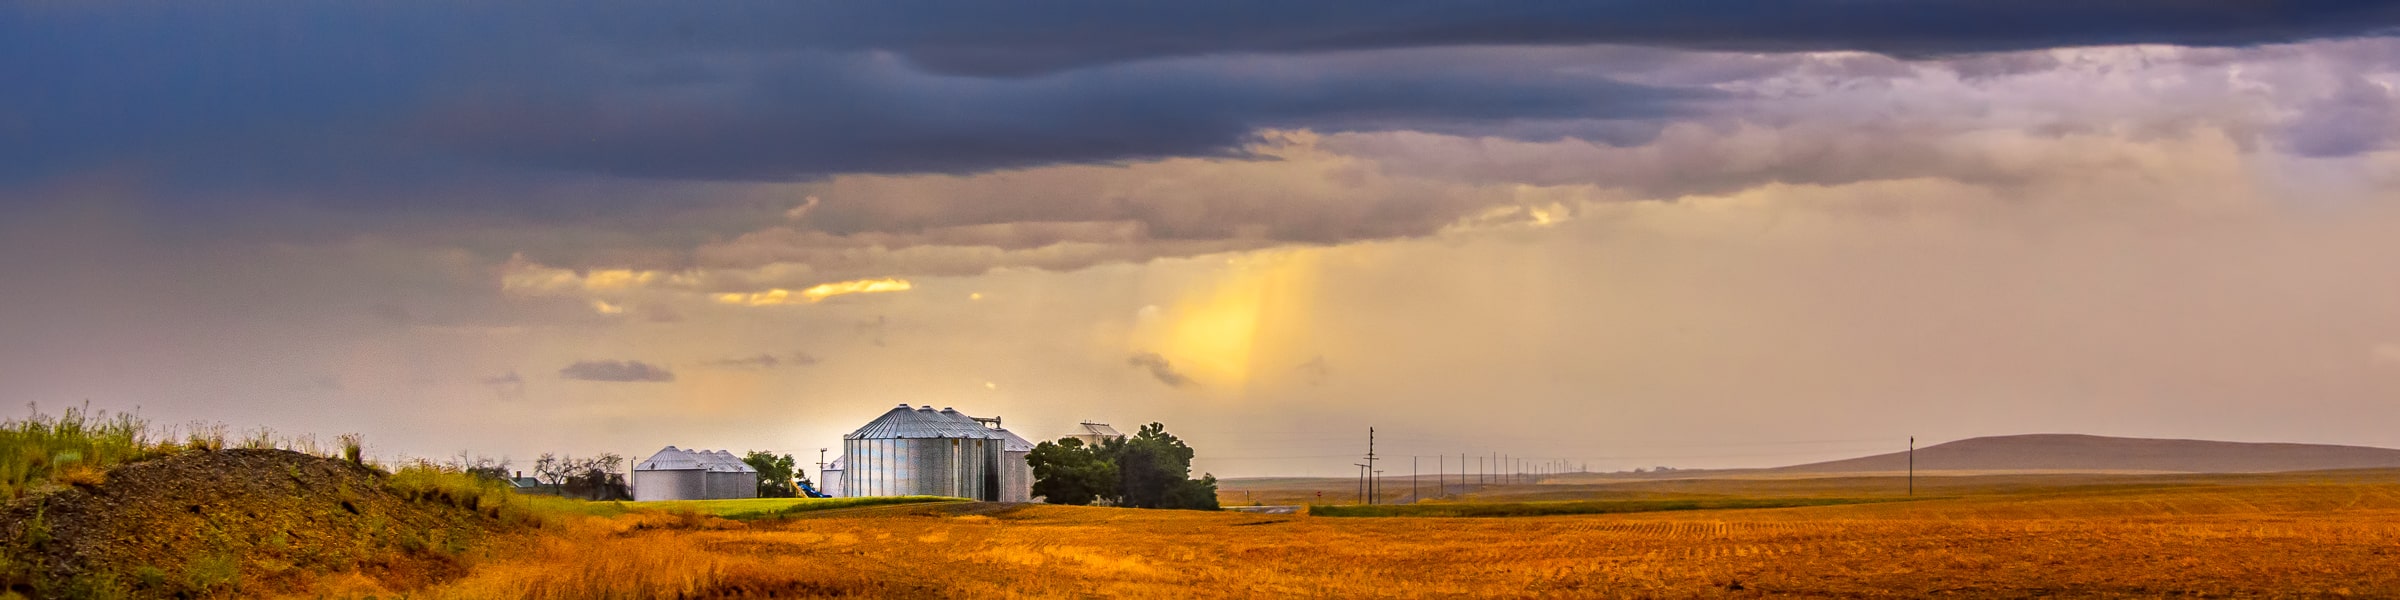 Storage silos on a wheat farm in Montana glisten in a summer storm. Montana Summer Landscapes